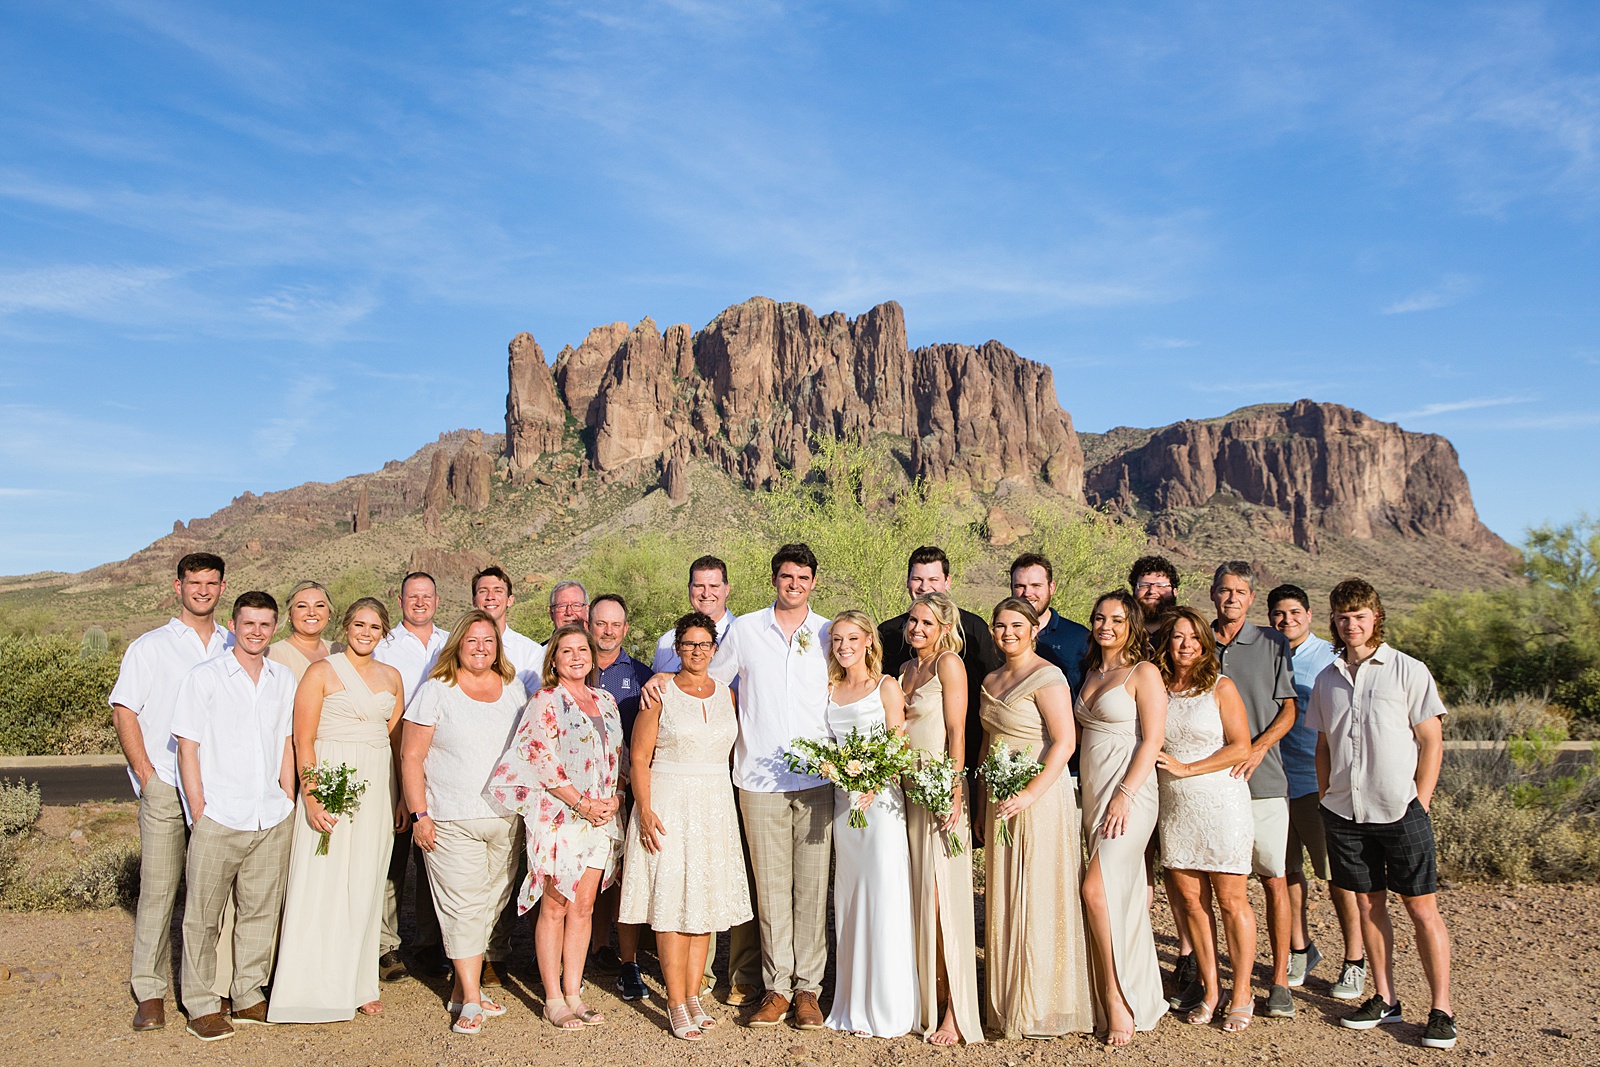 All the wedding guests pose with the bride and groom during their Superstition Mountain micro wedding by Arizona wedding photographer PMA Photography.